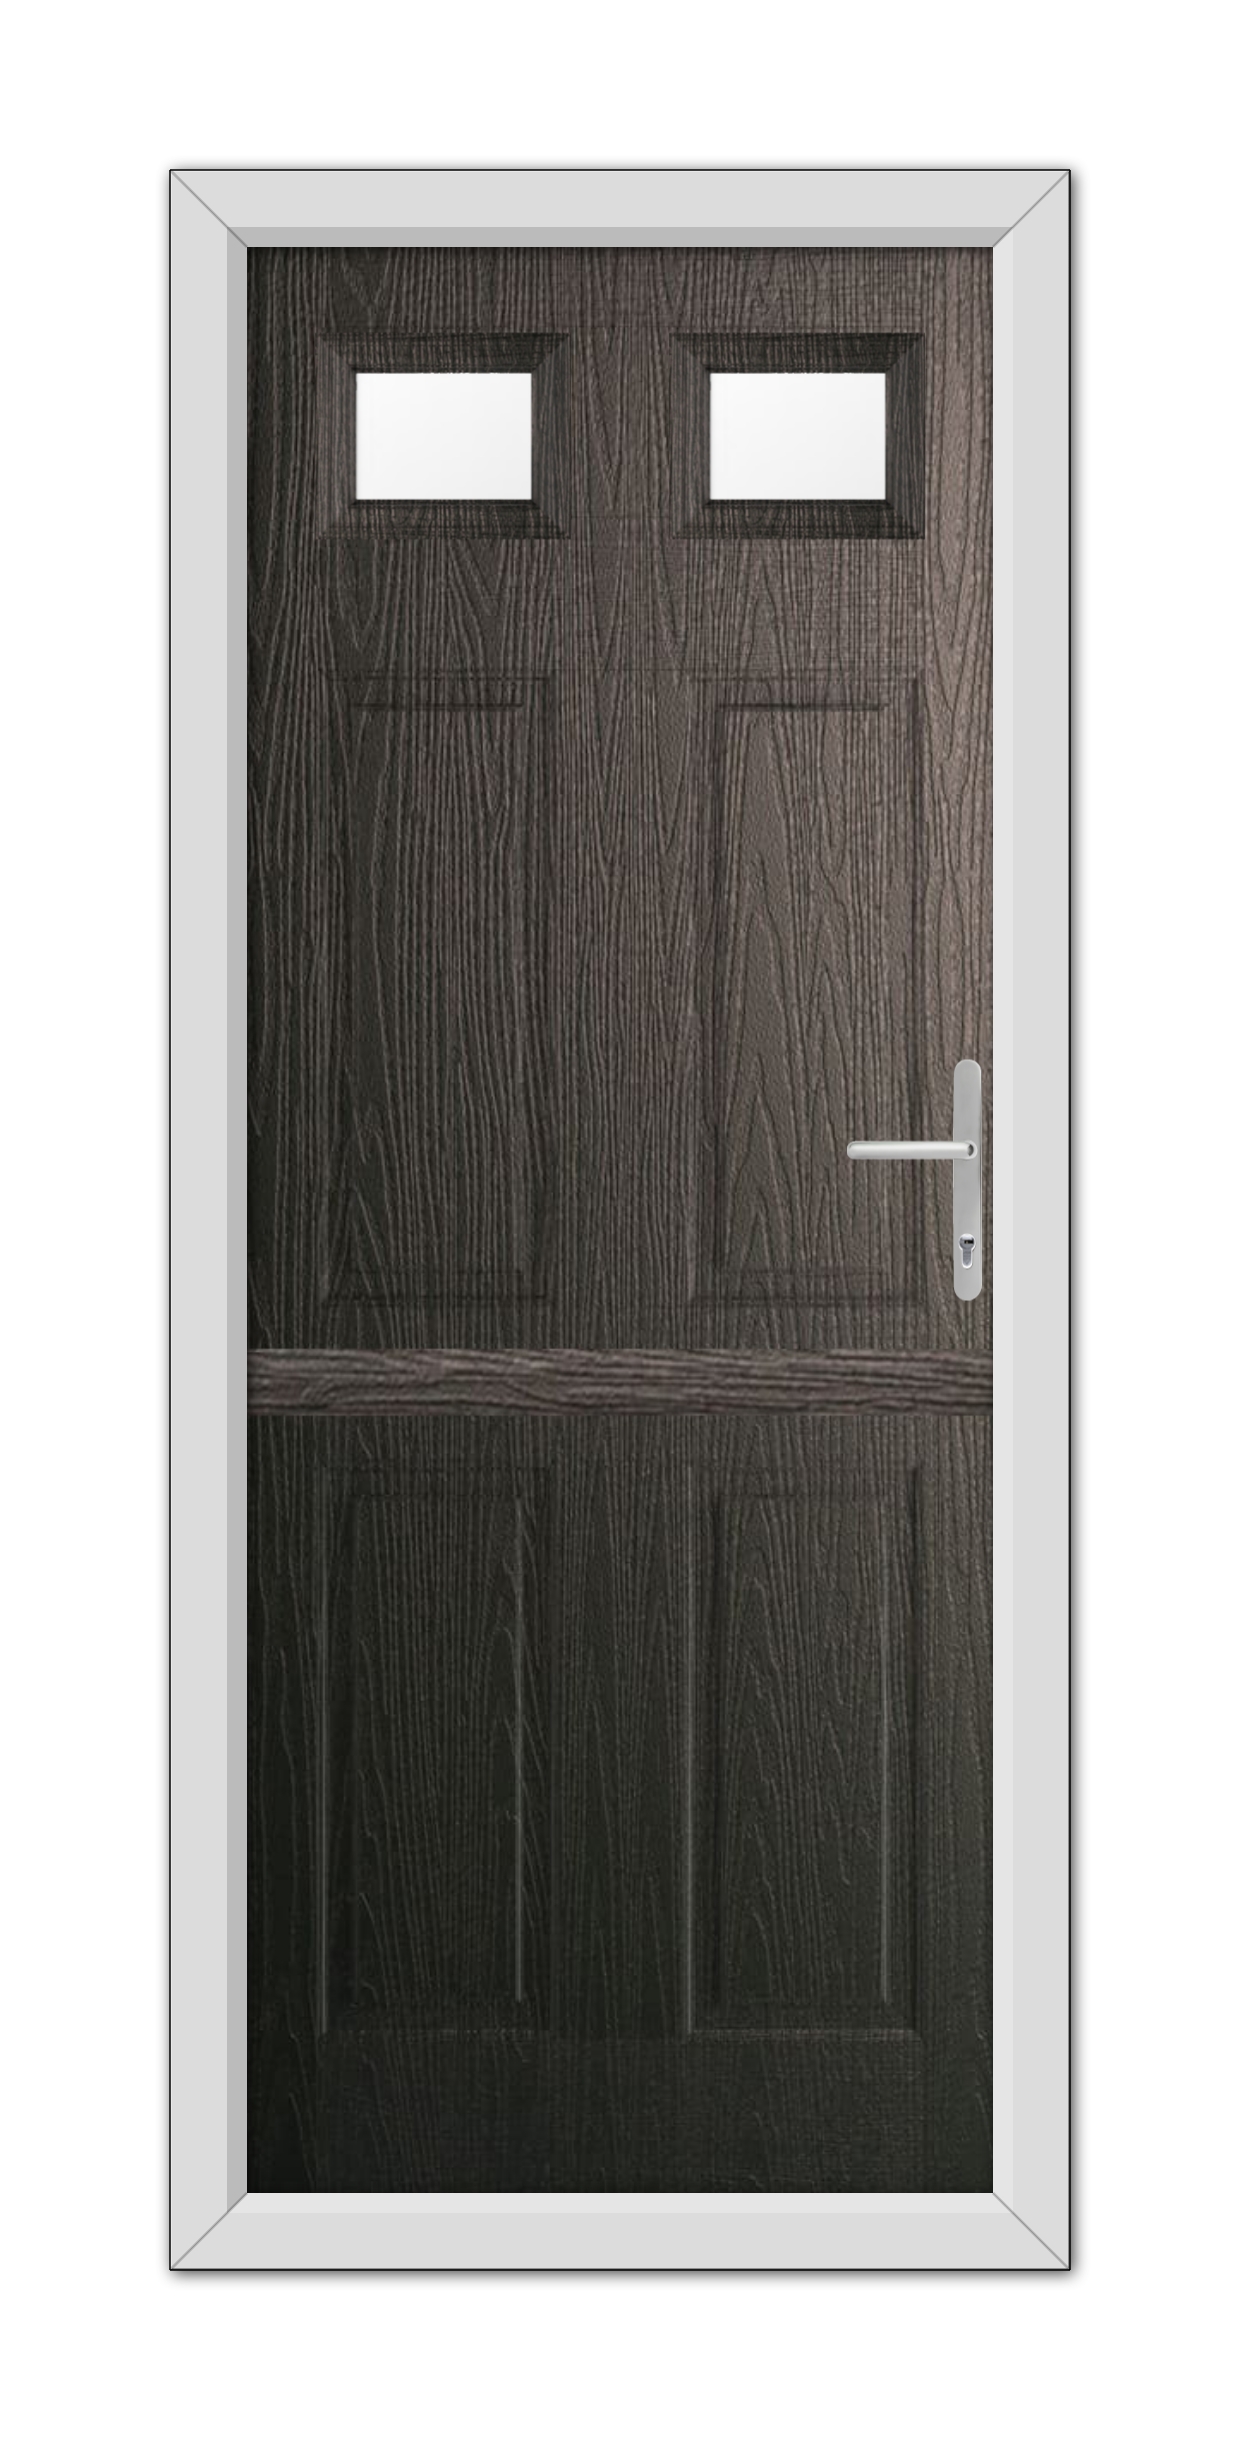 A Schwarzbraun Middleton Glazed 2 Stable Composite Door 48mm Timber Core with two small square windows and a metallic handle, set within a white frame.